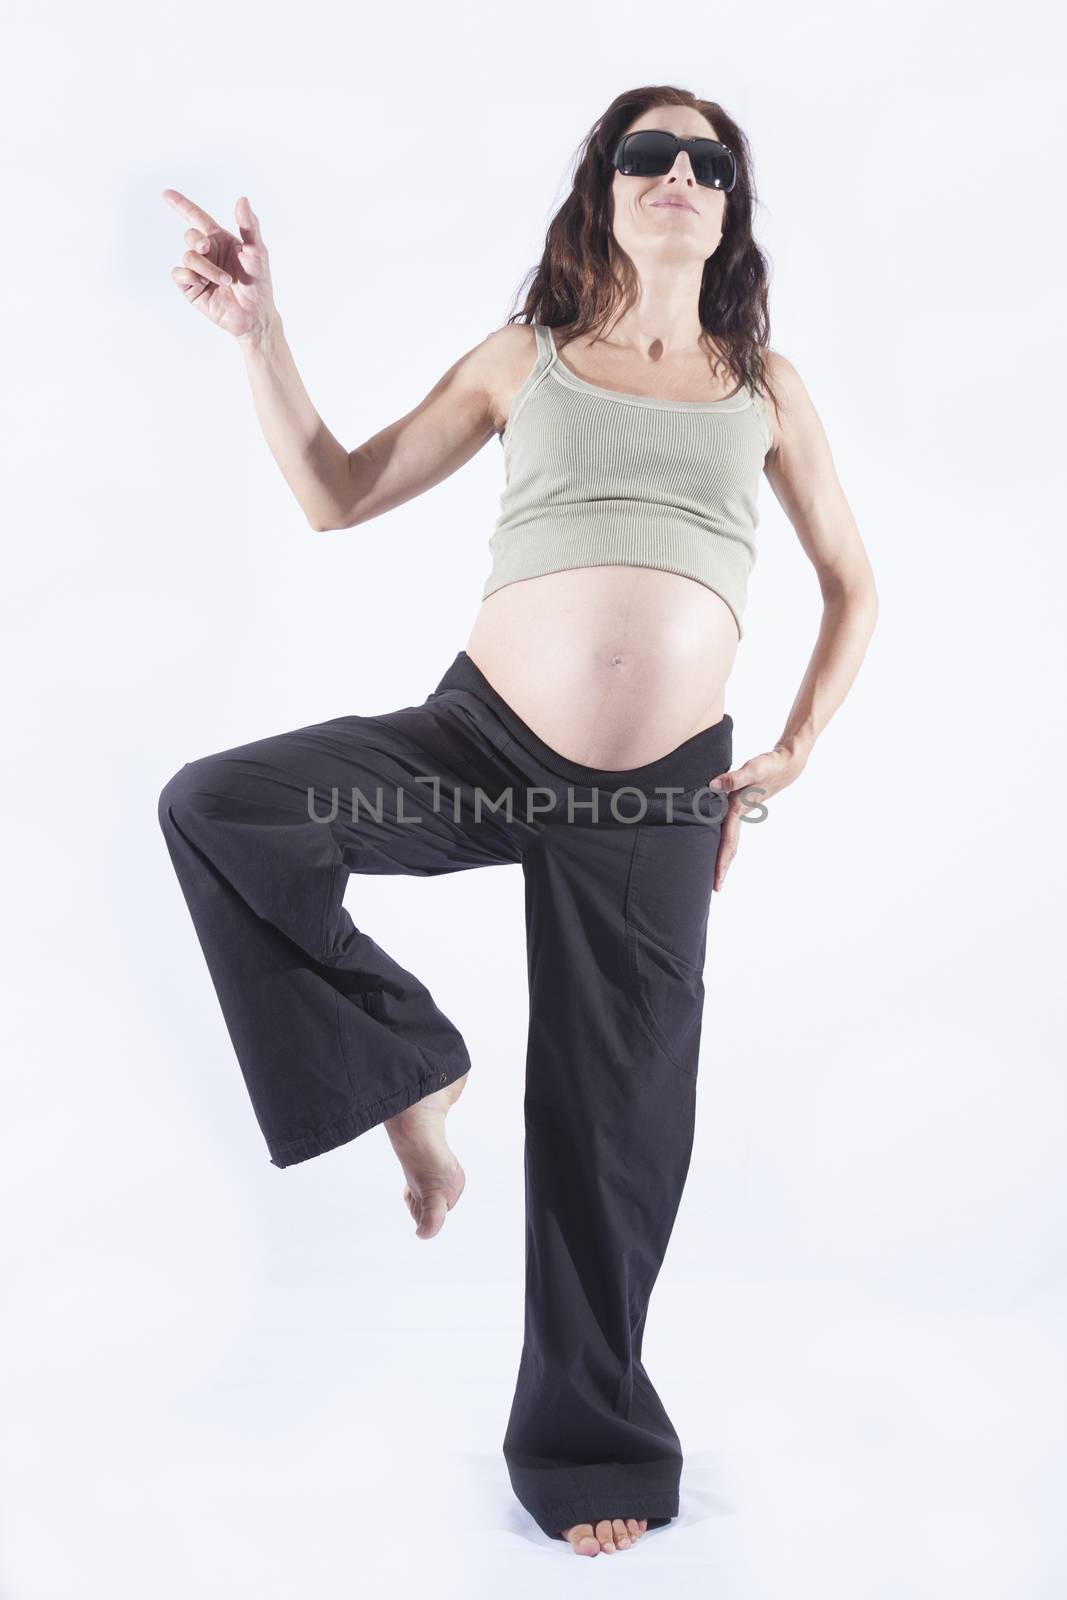 eight month brunette pregnant woman naked paunch black sunglasses smiling standing pointing with finger isolated over white background